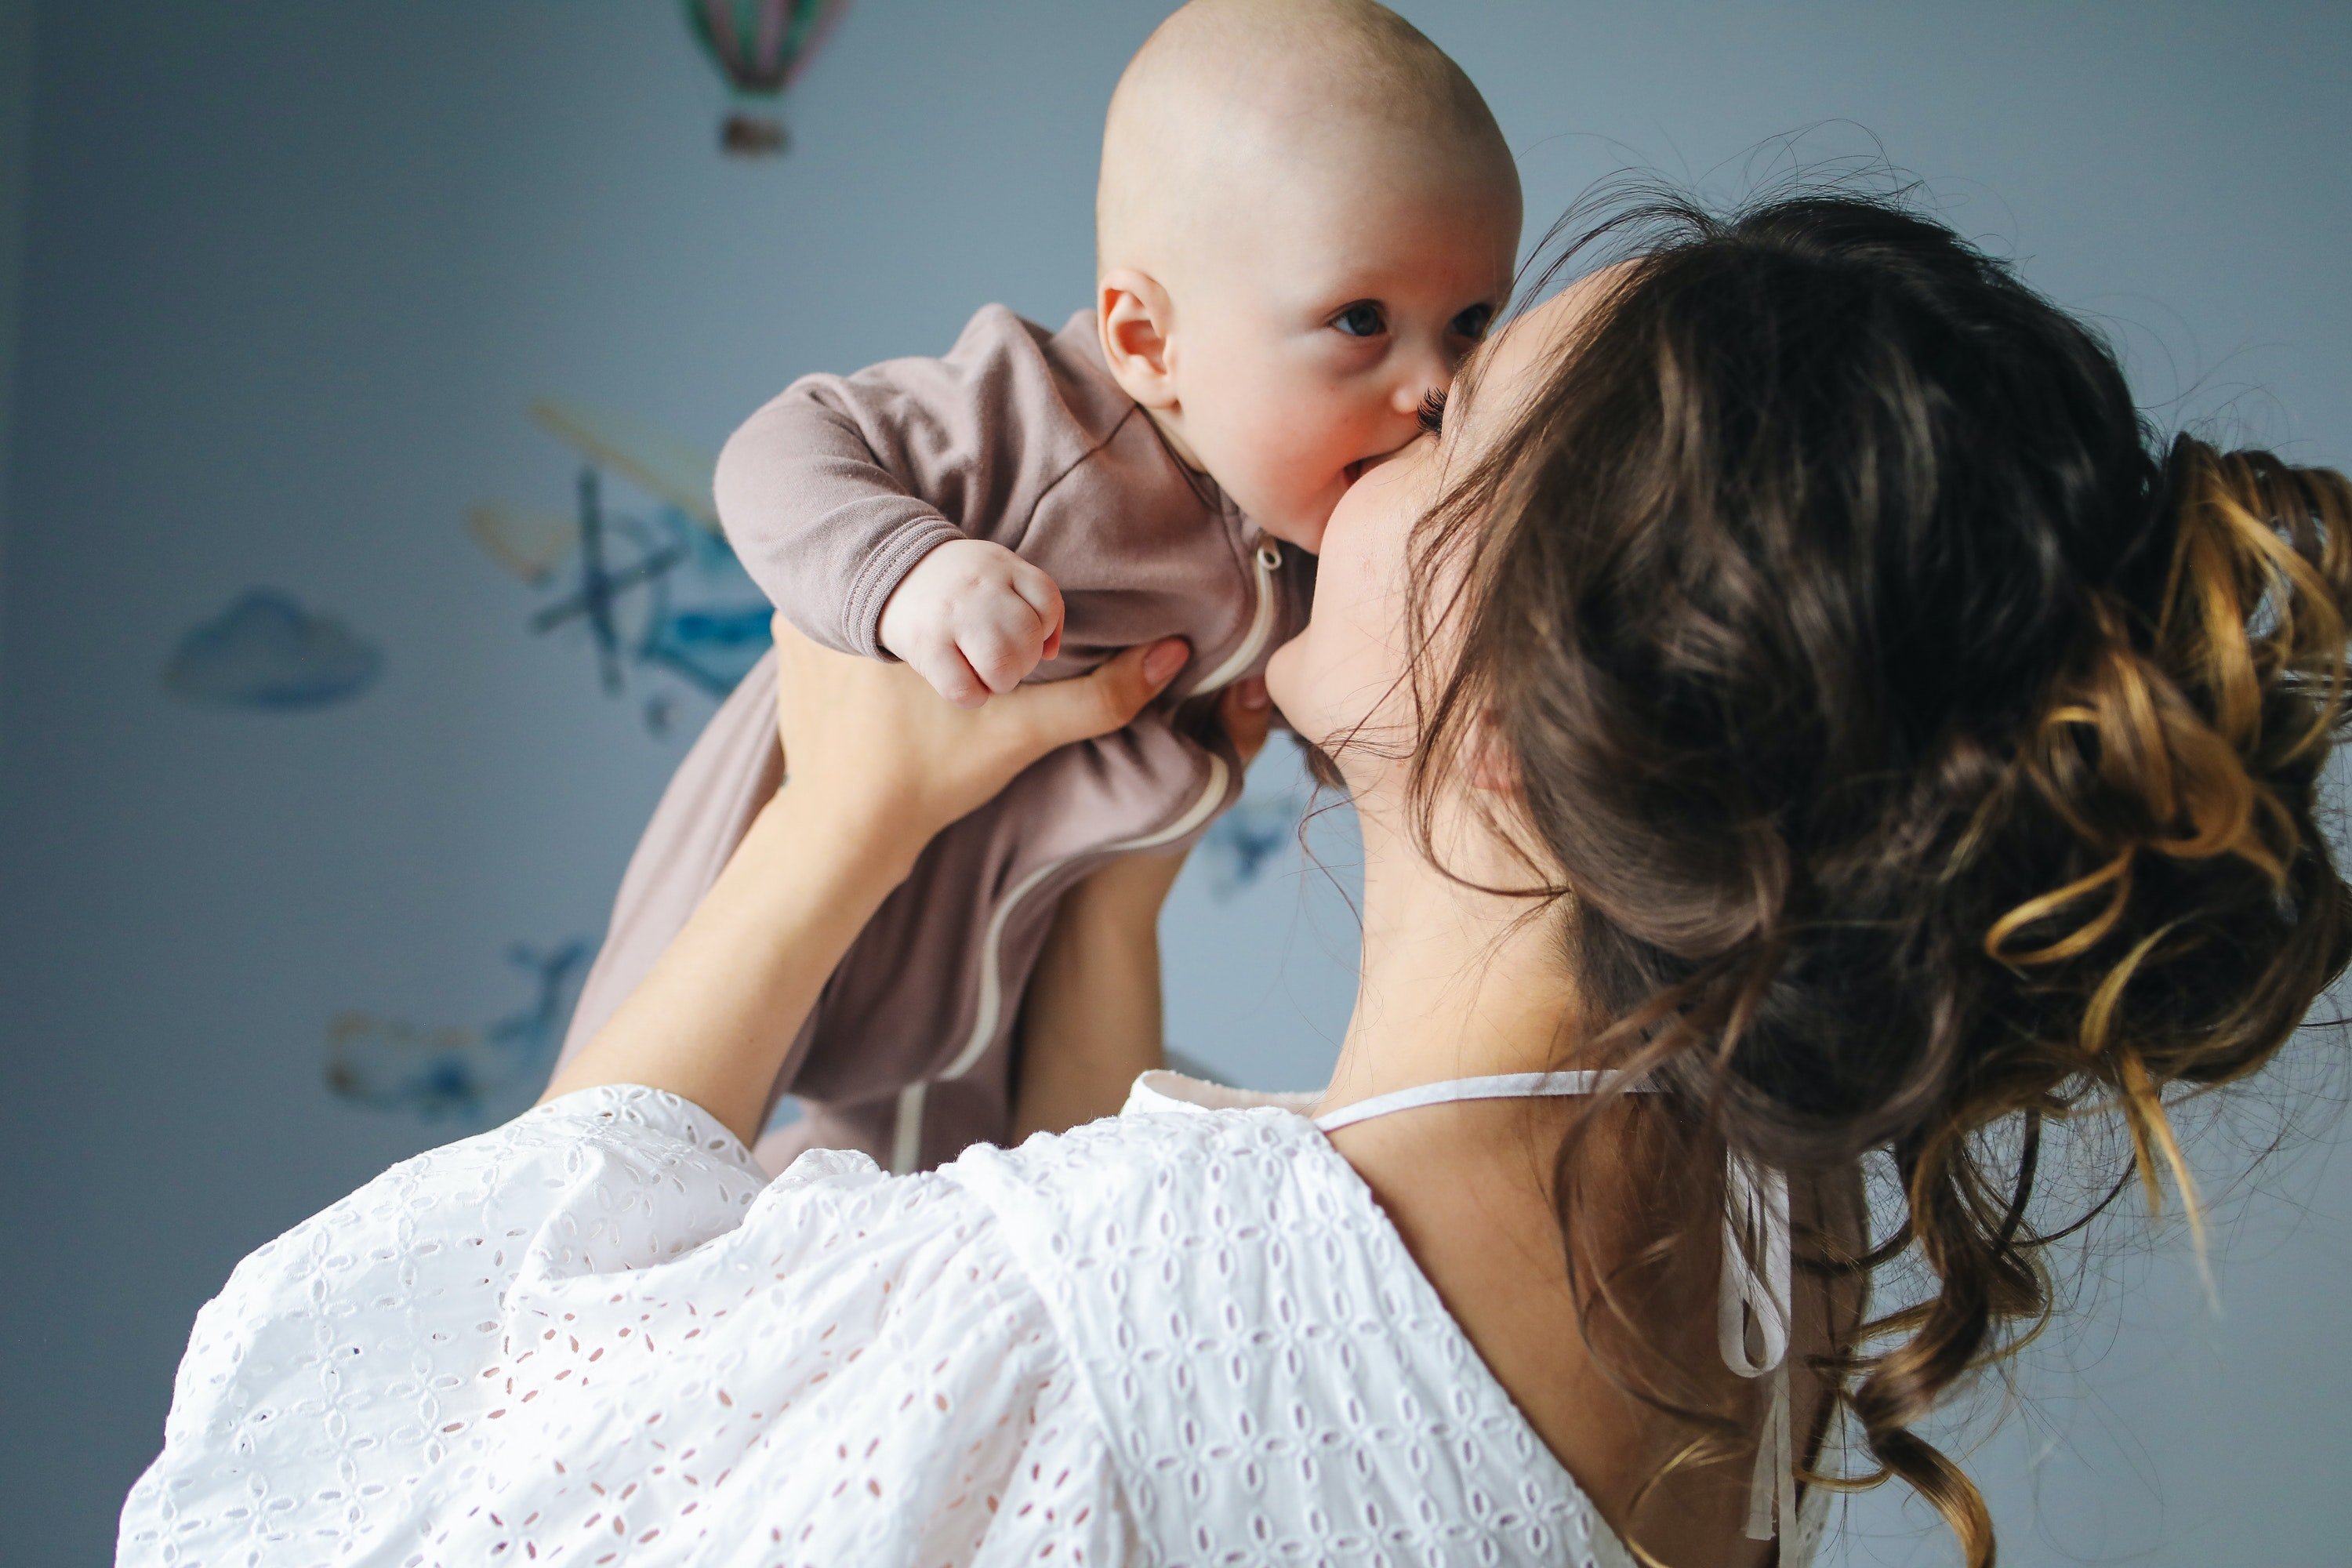 A mother kissing her cute baby. | Source: Pexels